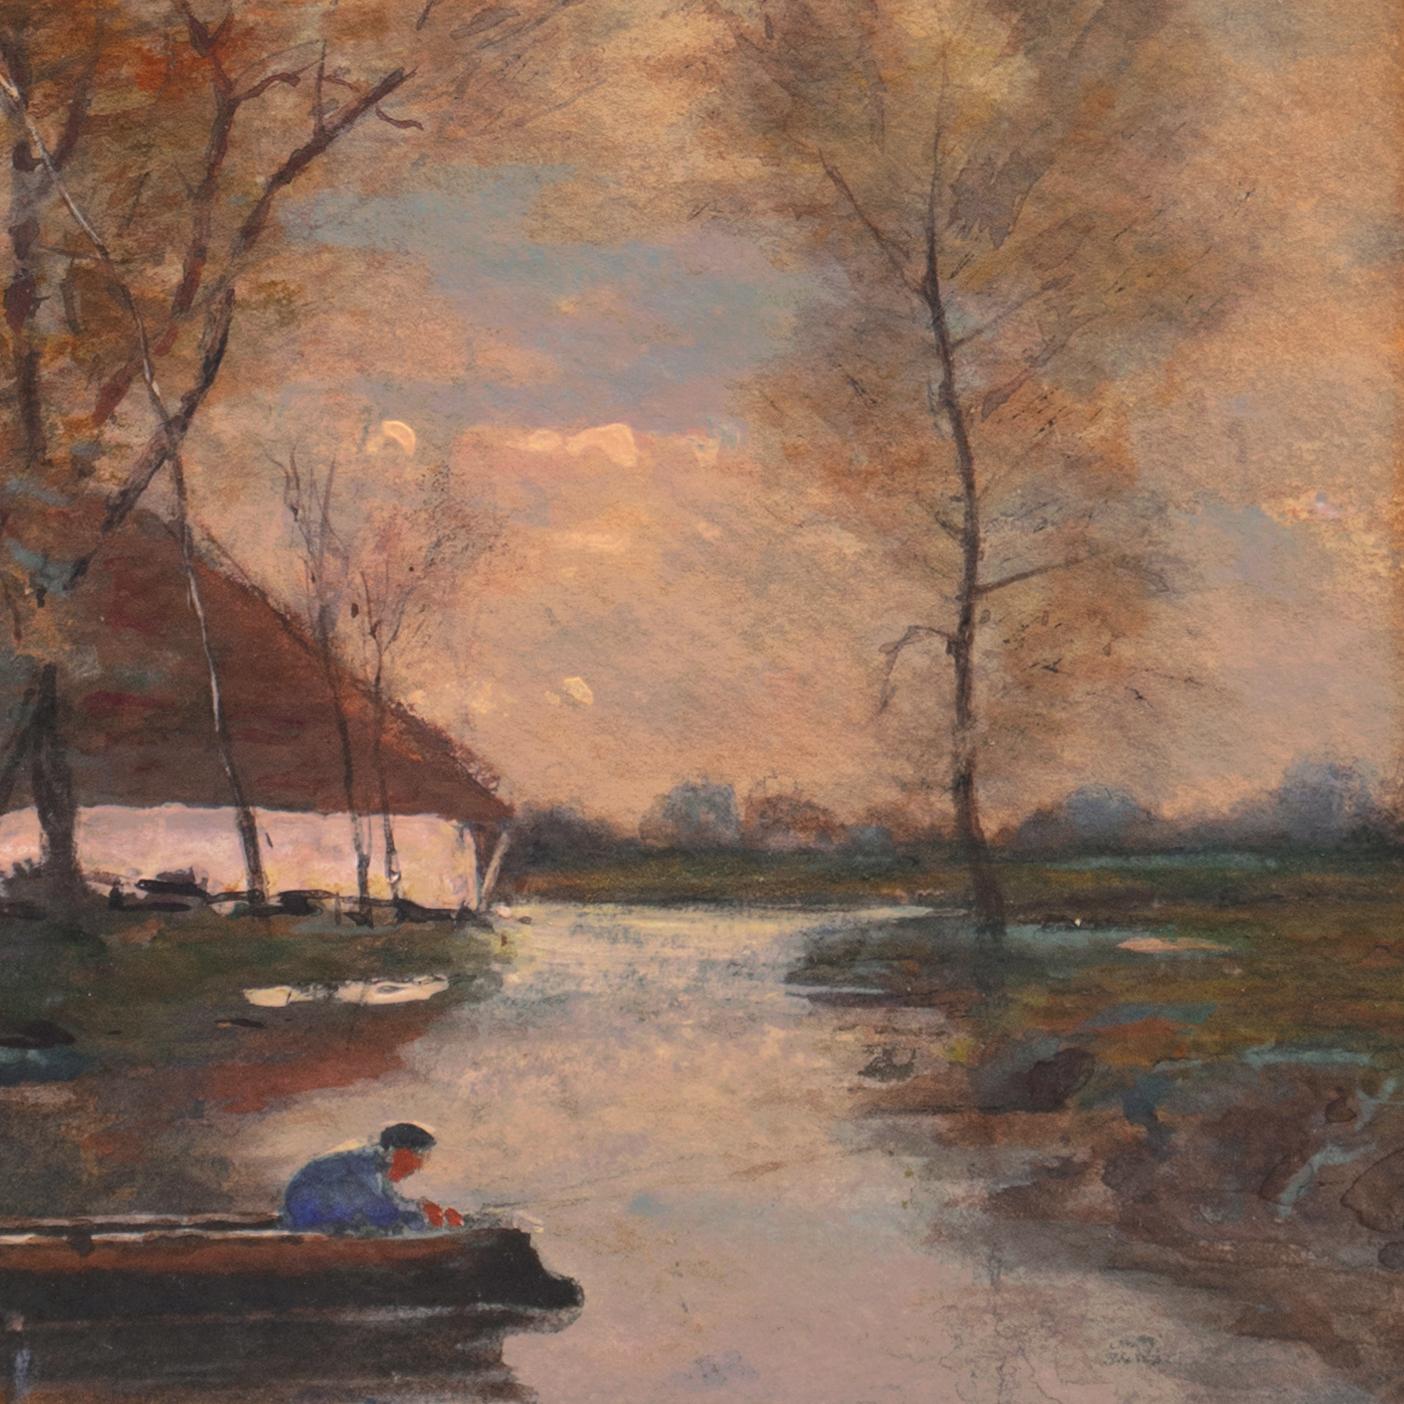 Signed lower right, 'Arthur Dawson' (American, 1857-1922) and painted circa 1915; additionally inscribed, verso, 'The Stream'.
Bearing old framing label: Ferguson Art Shop, Flint, Michigan

Born in Crewe, England, Arthur Dawson studied first as